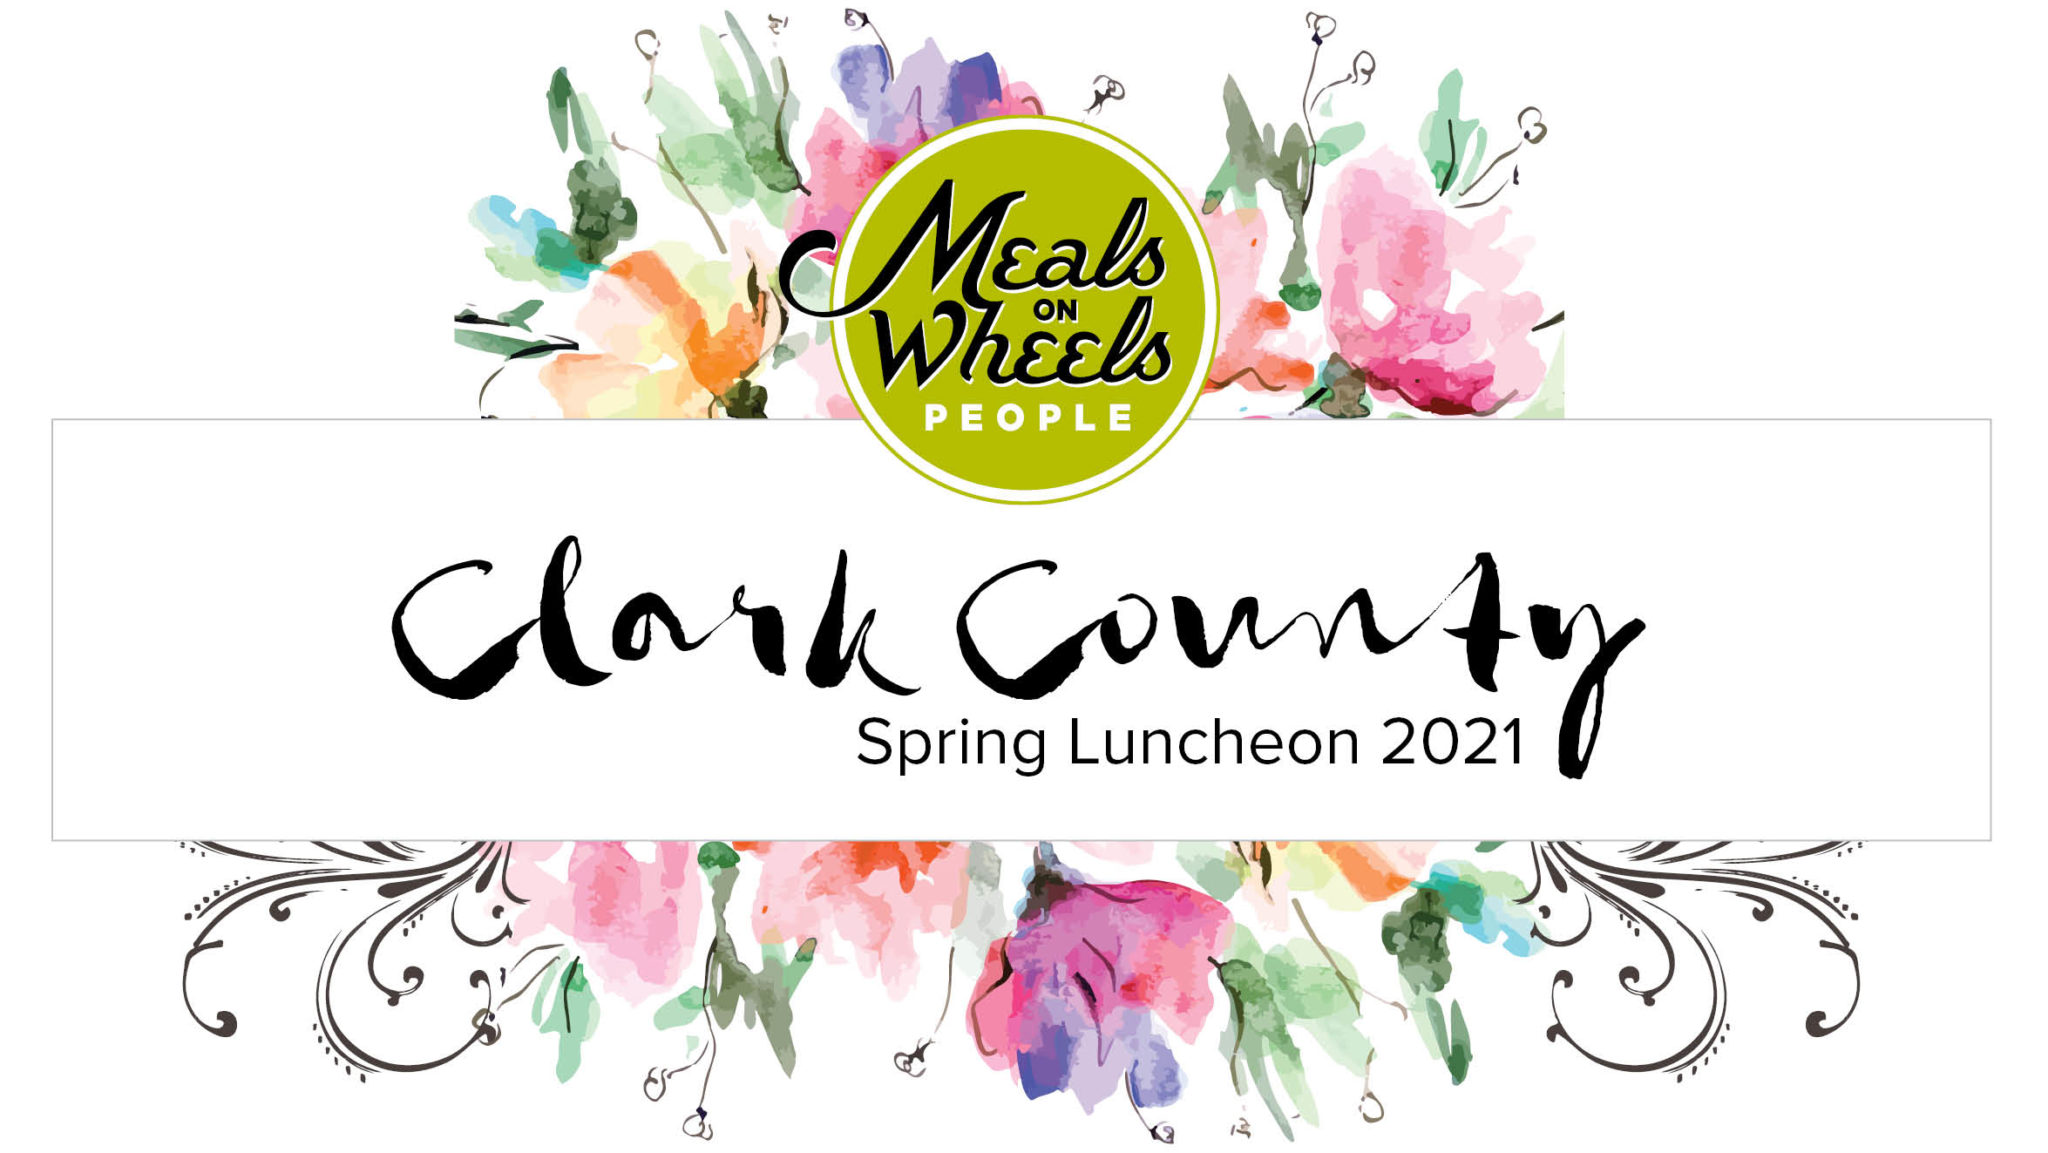 Clark County Spring Luncheon 2021 Meals on Wheels People